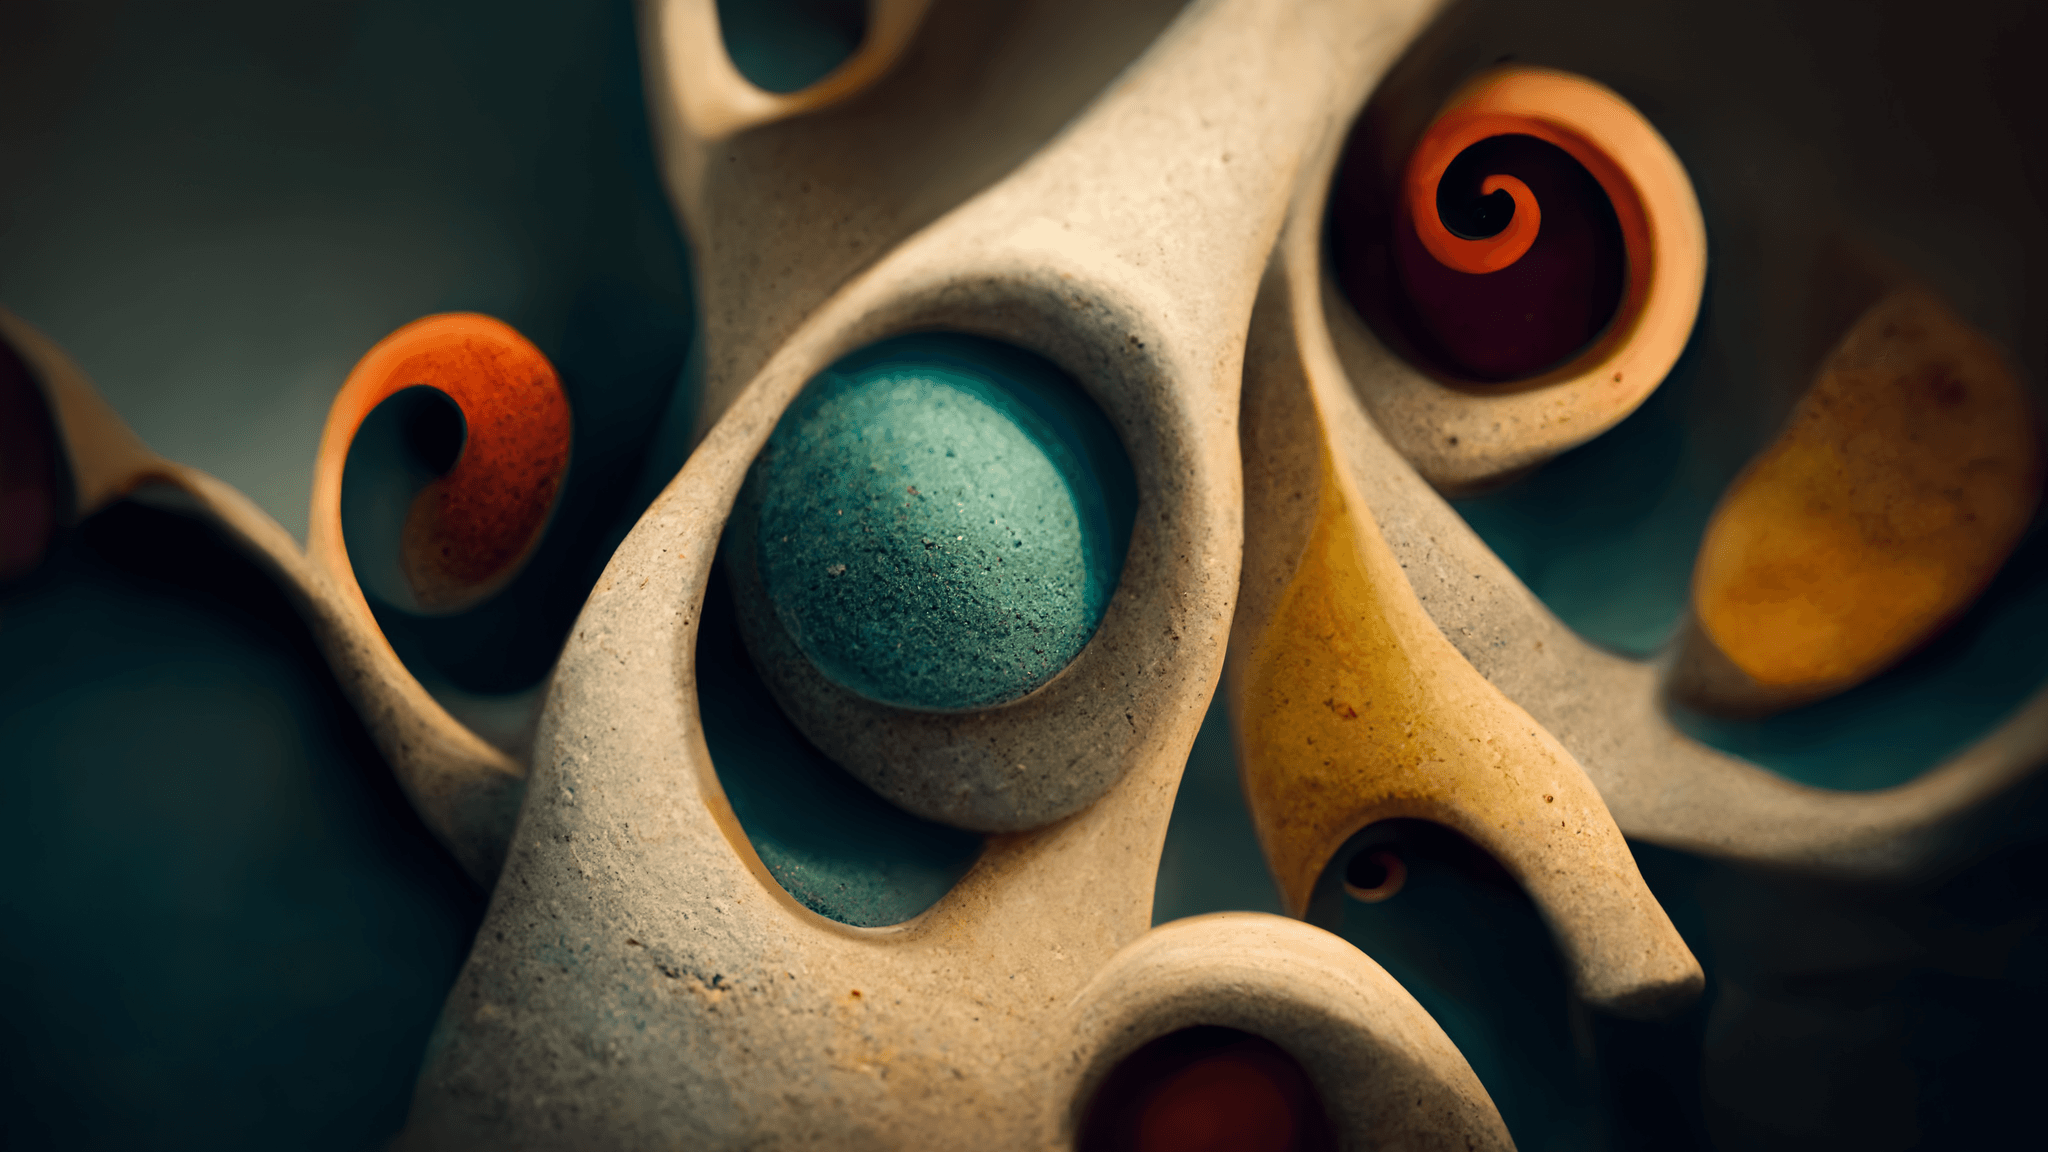 Abstract Clay Sculpture in Motion #3